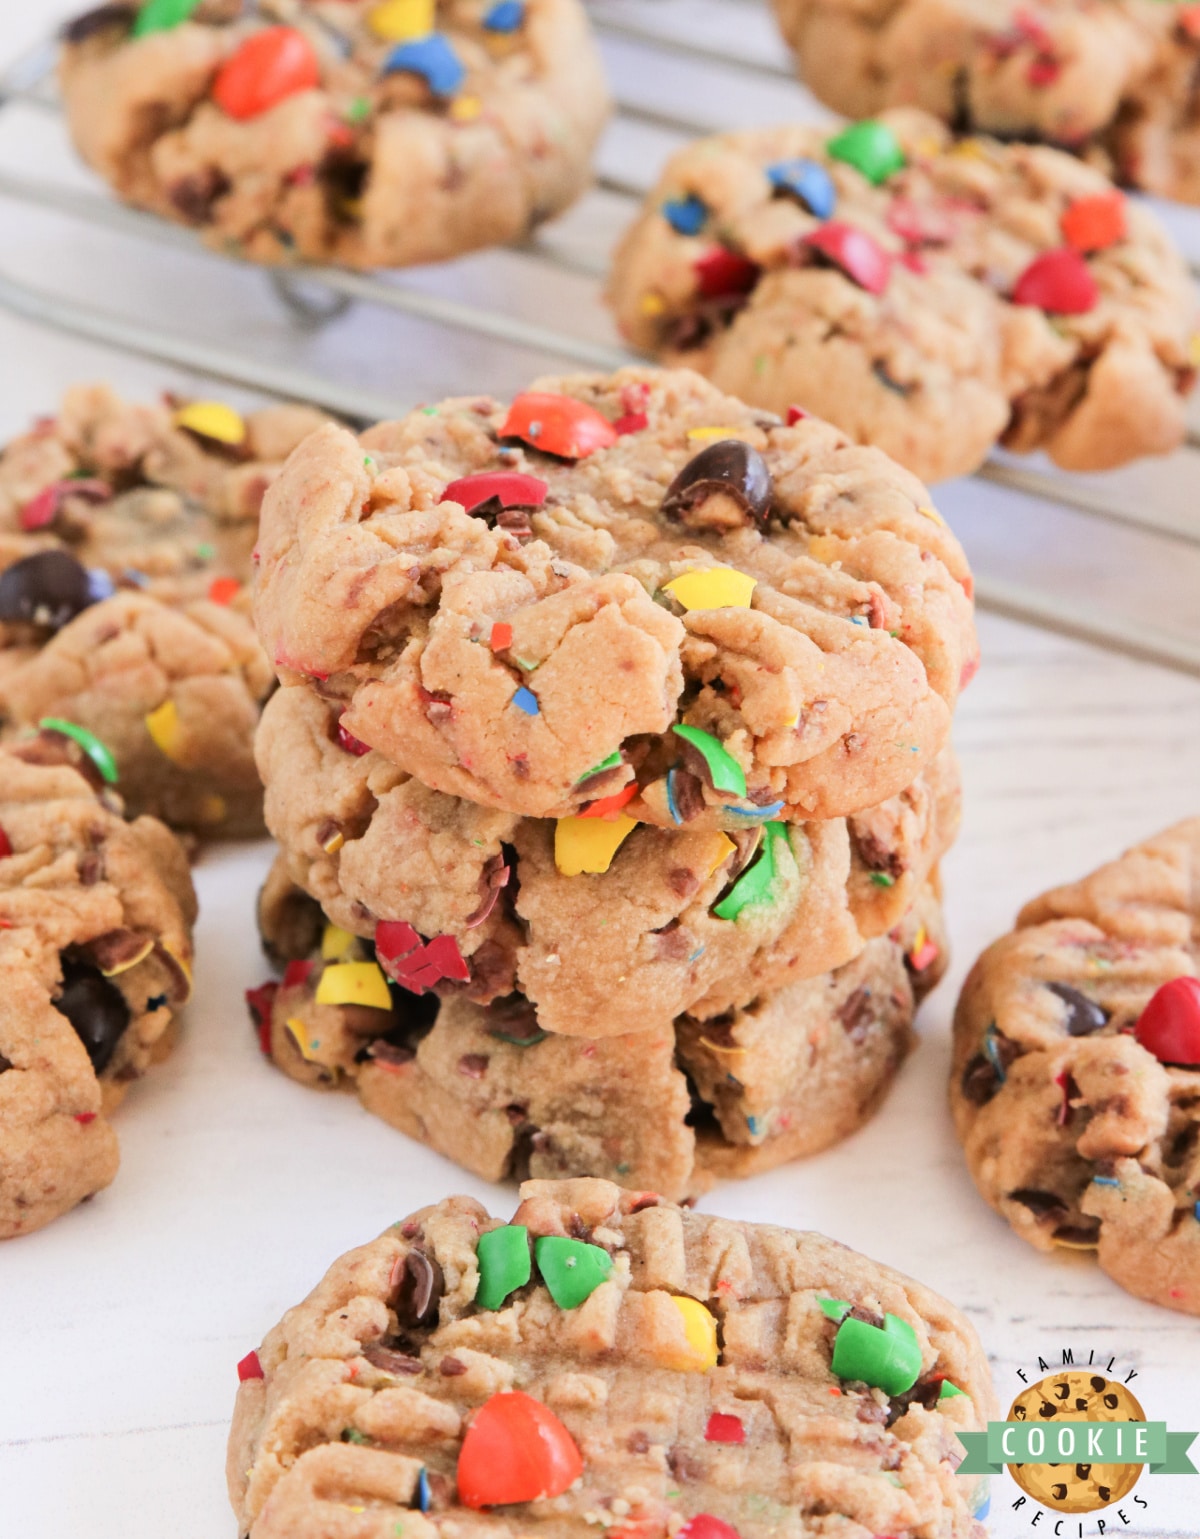 Peanut Butter M&M Cookies are soft, chewy and packed with peanut butter flavor! Our favorite peanut butter cookie recipe is even better with Peanut Butter M&Ms! 